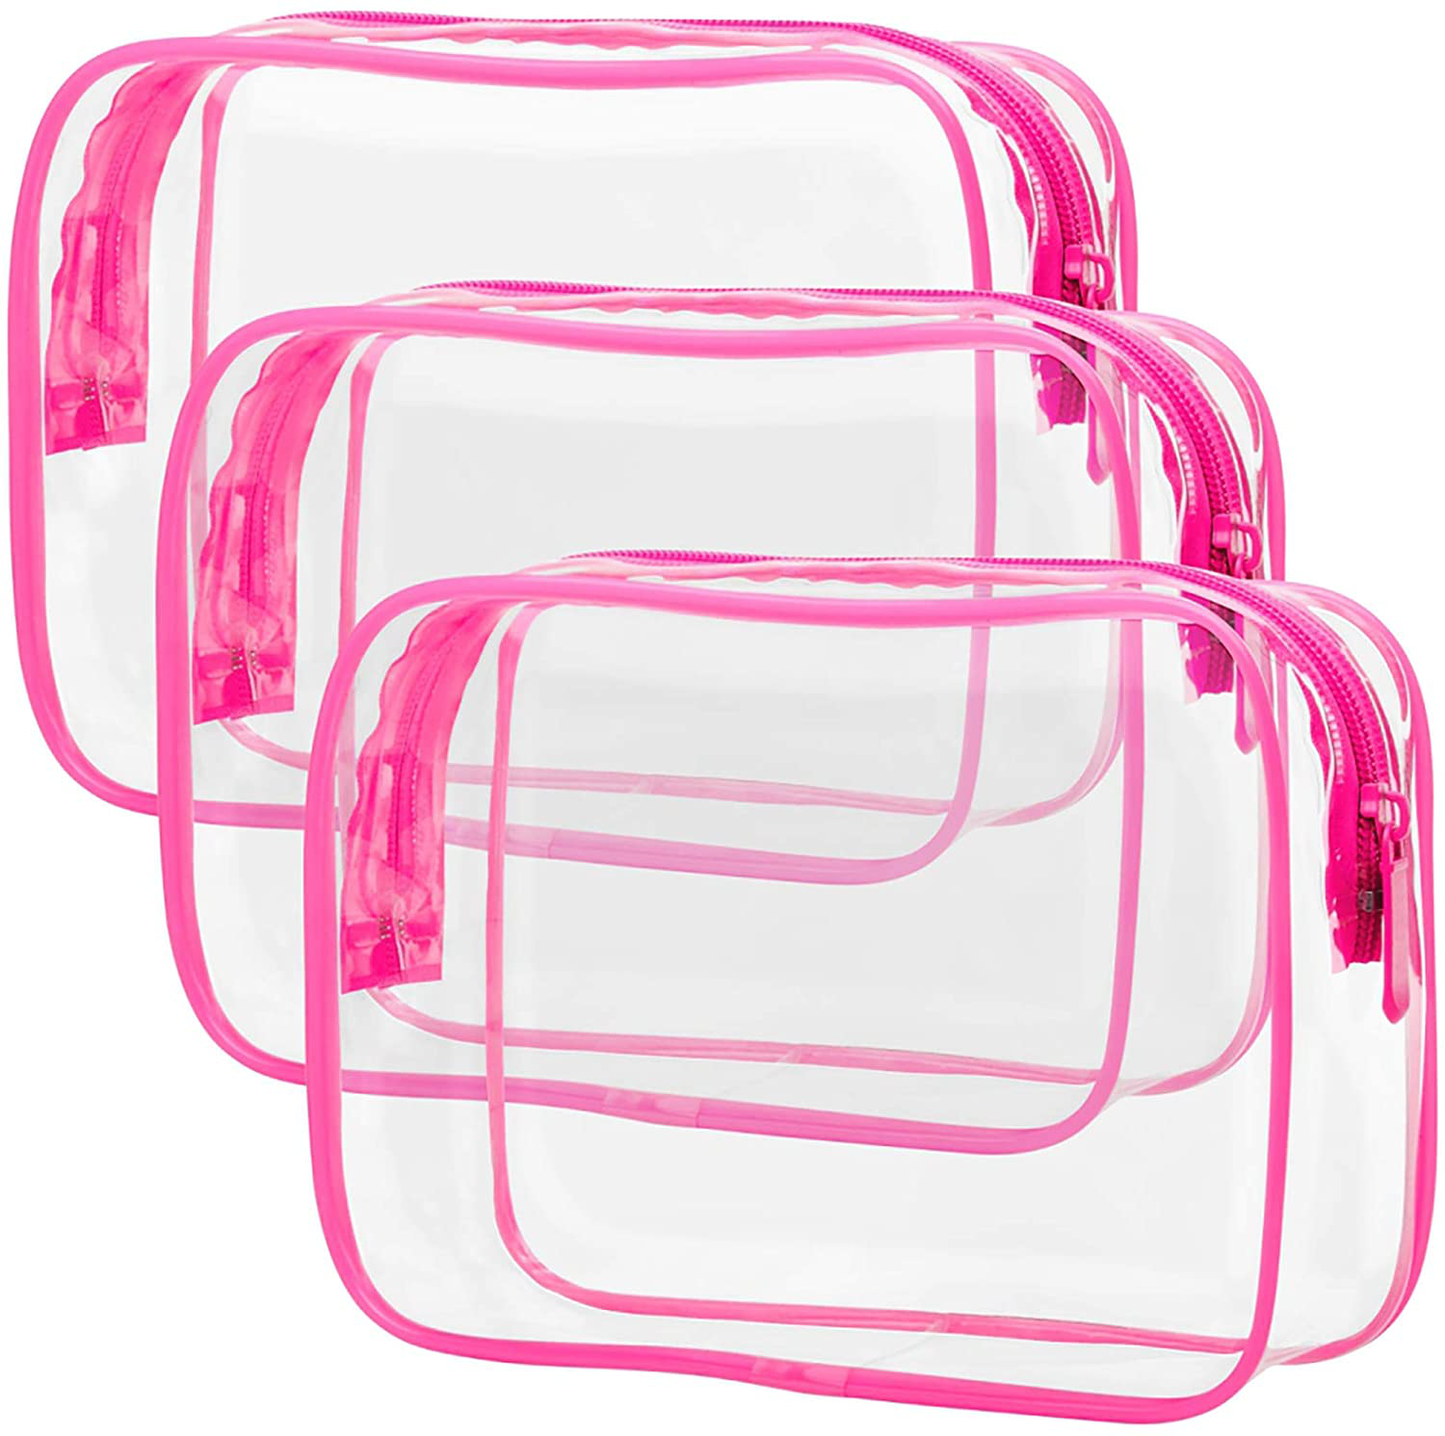 Clear Toiletry Bag, Packism 3 Pack TSA Approved Toiletry Bag Quart Size Bag, Travel Makeup Cosmetic Bag for Women Men, Carry on Airport Airline Compliant Bag